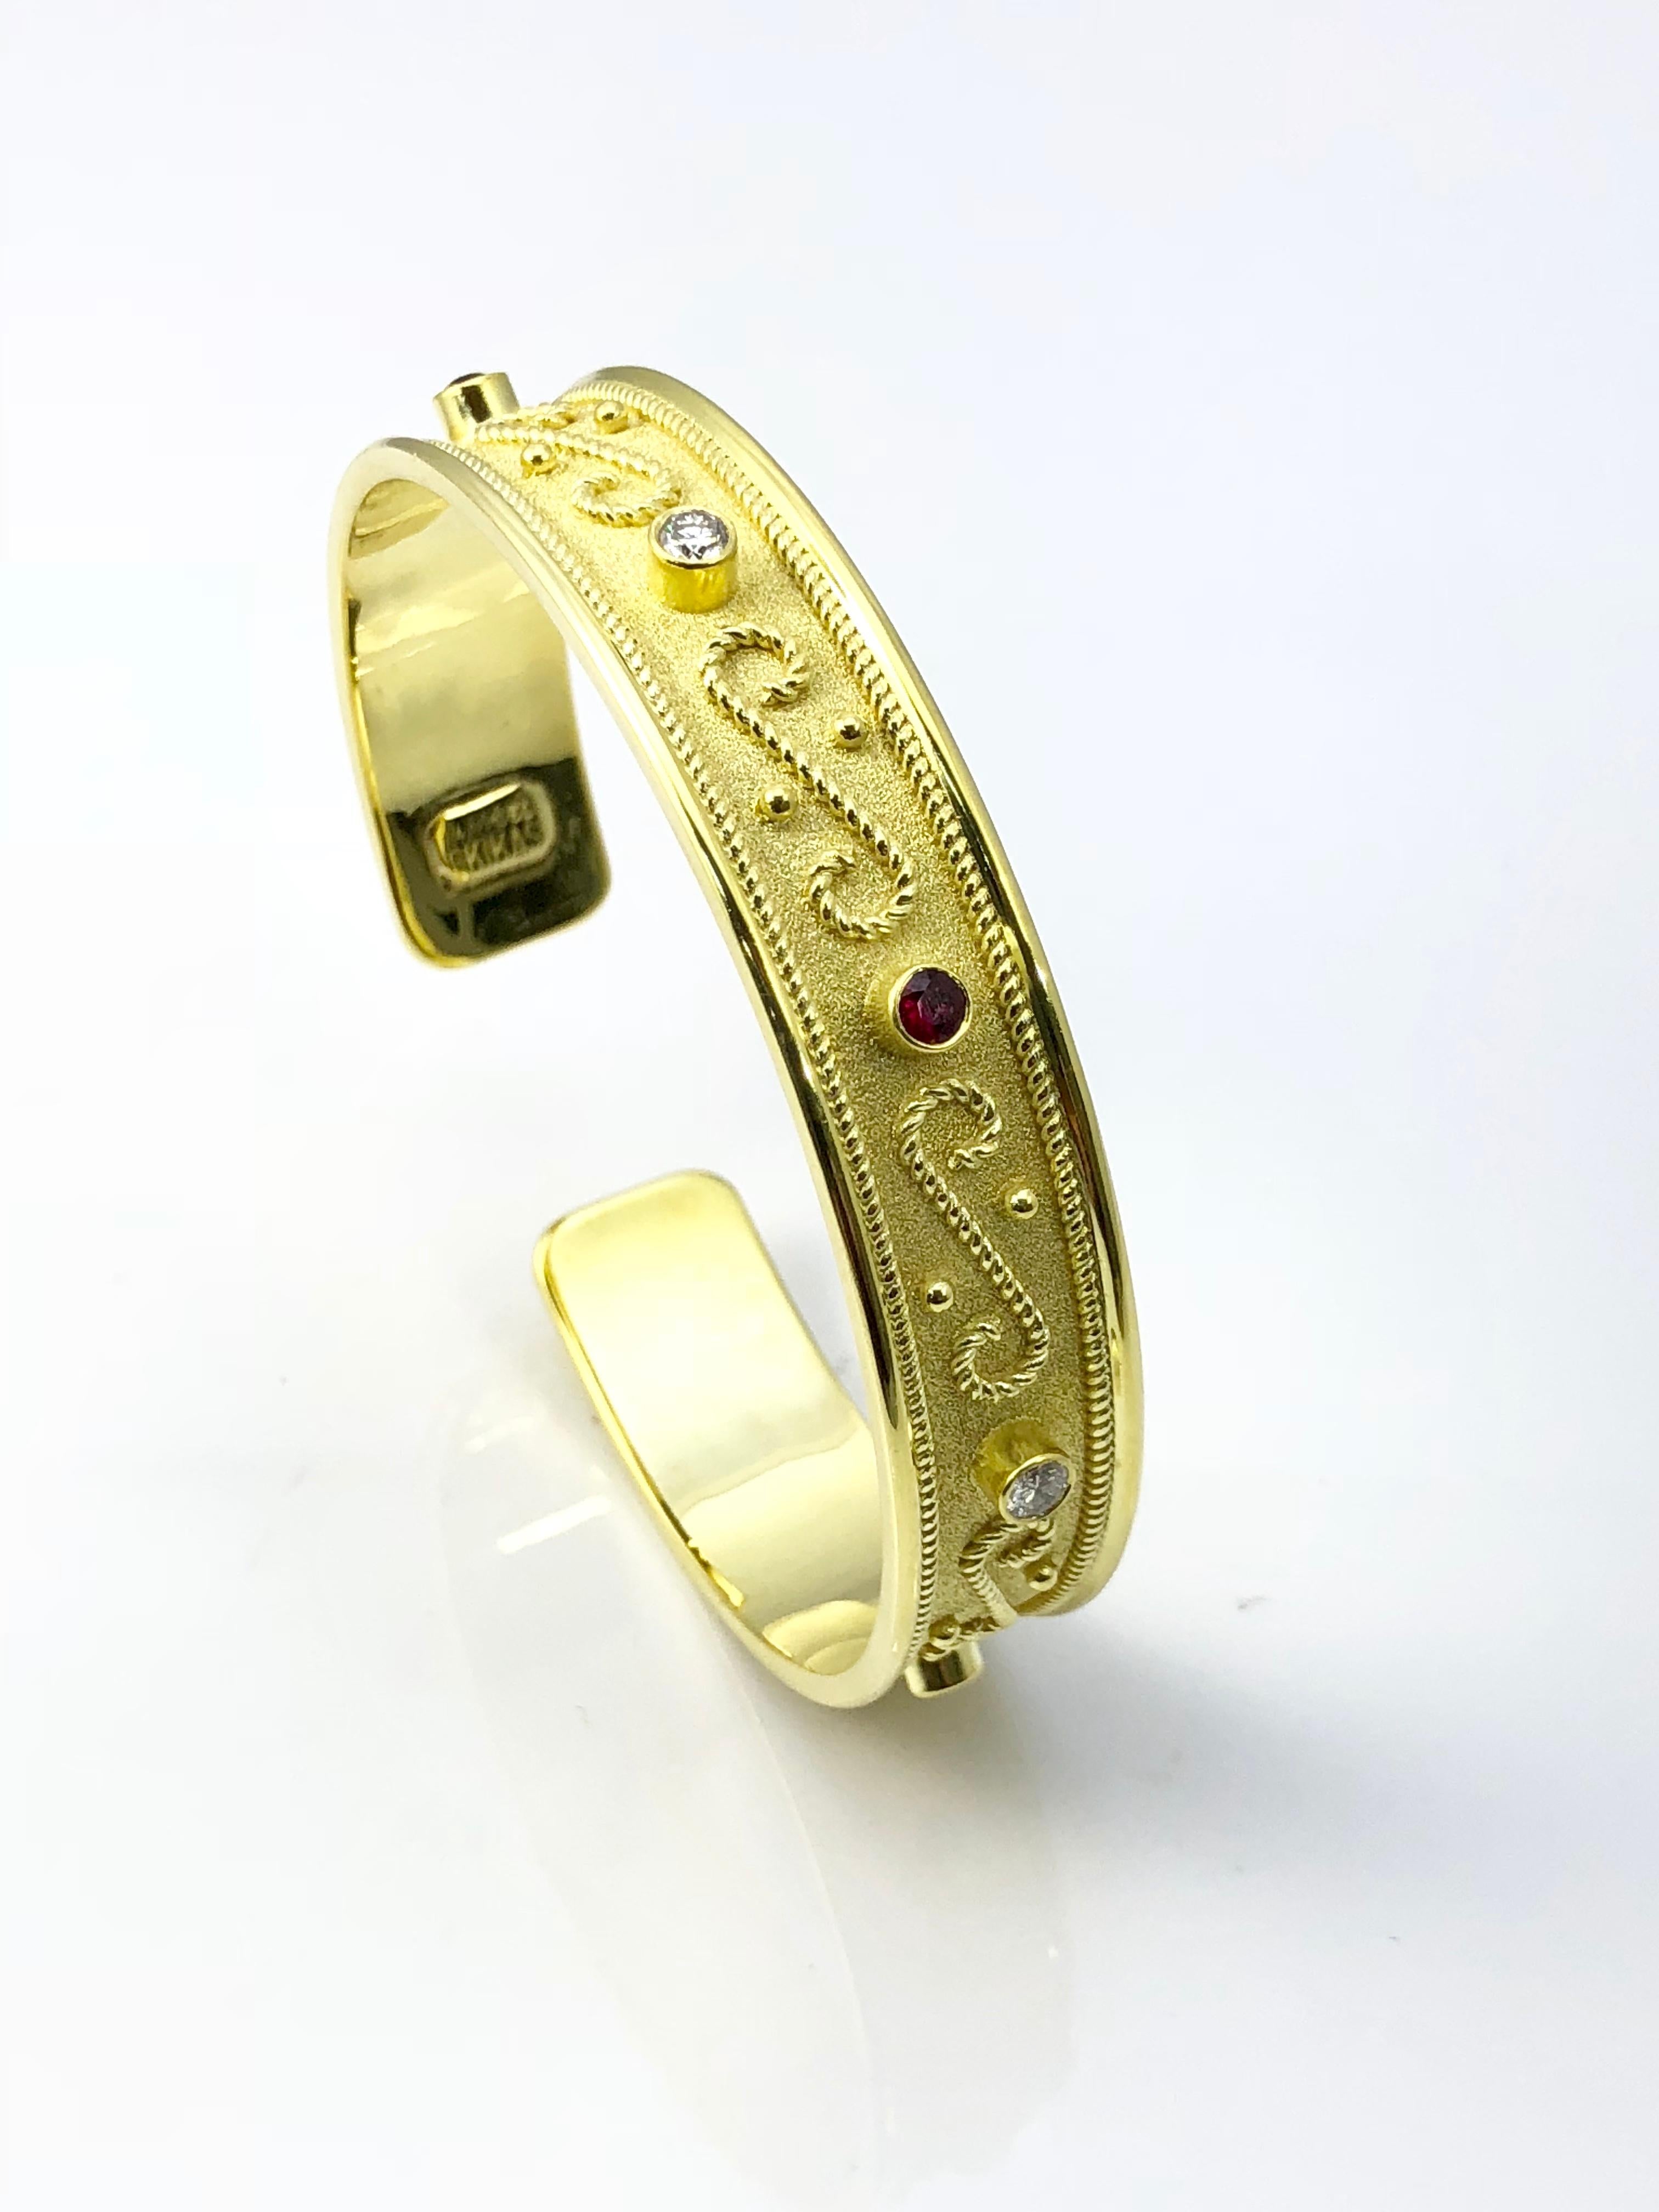 S.Georgios designer Bangle Bracelet Hand Made in 18 Karat Yellow Gold all custom-made. This stunning bracelet is microscopically decorated with granulation work in Byzantine style - 